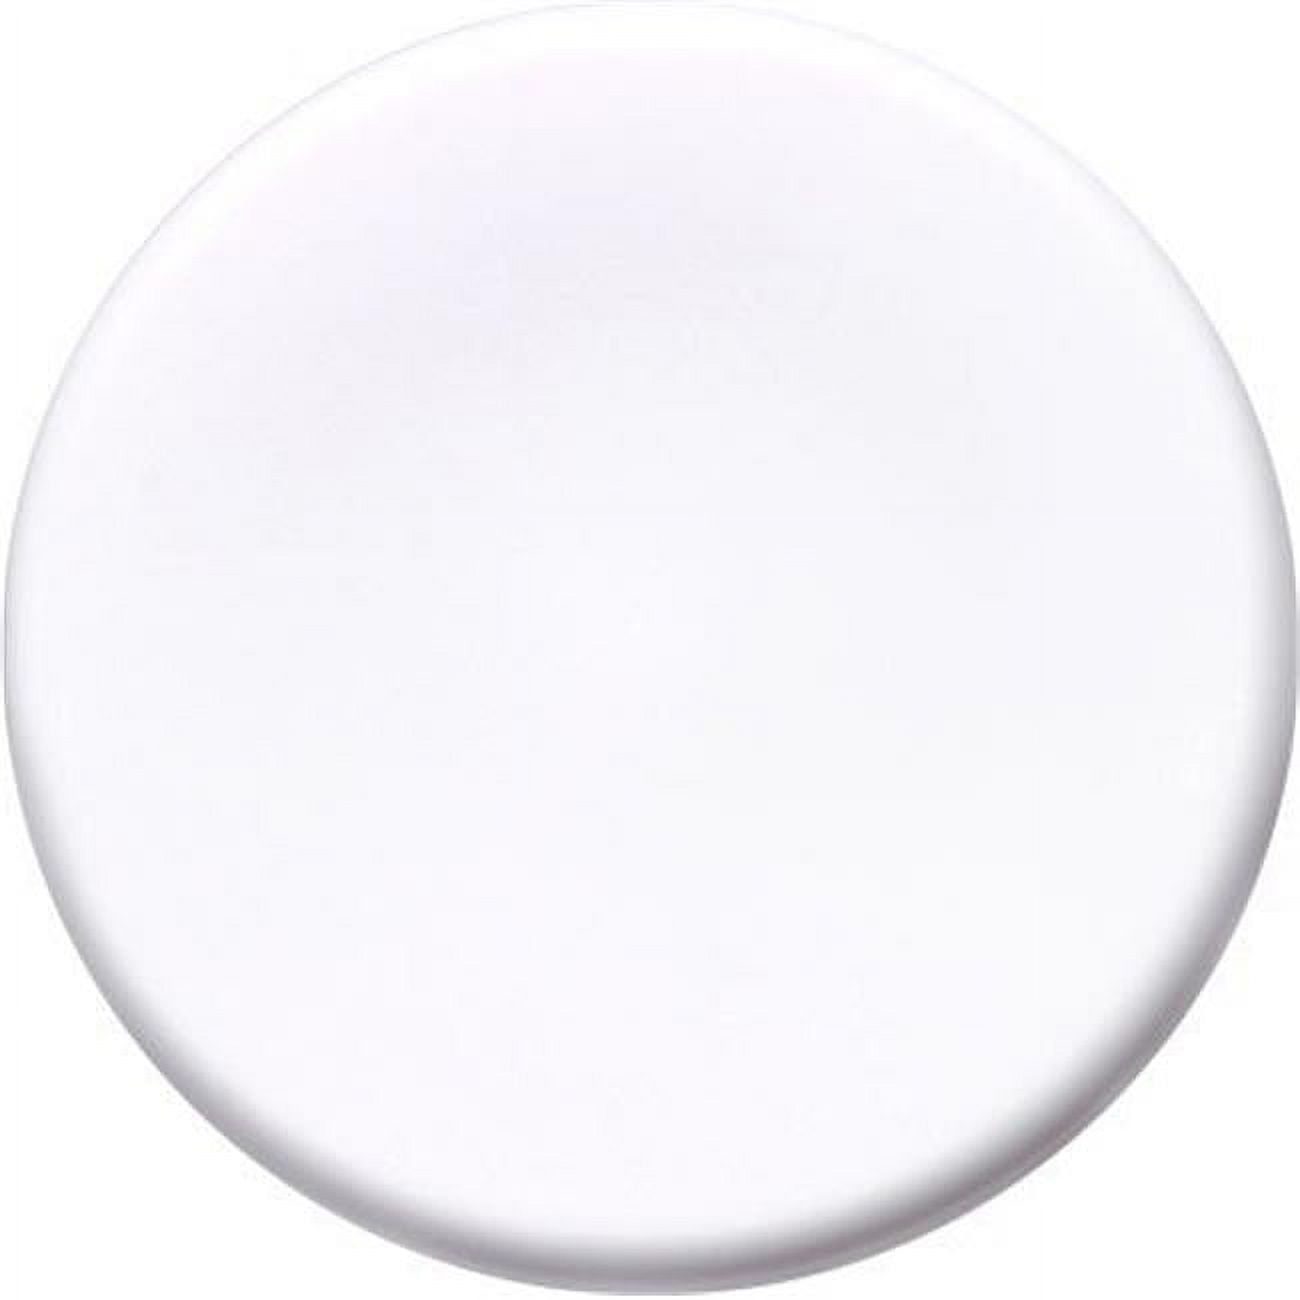 D6200 14 In. Drum Fixture 32w 120v, White